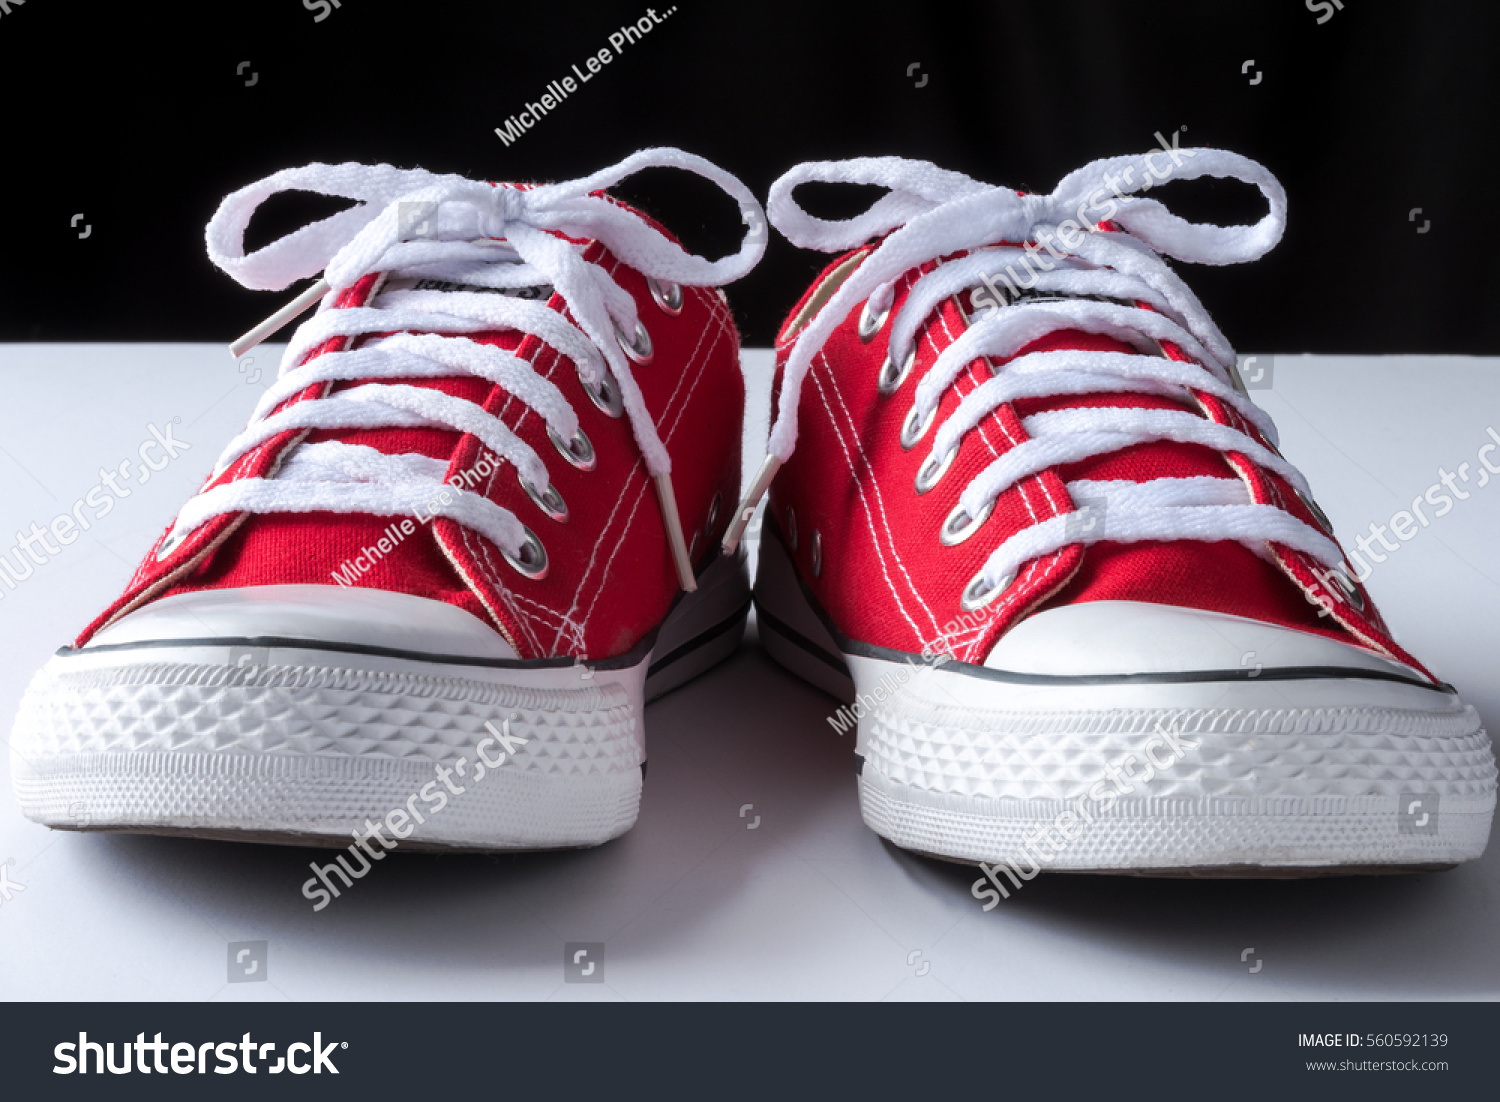 red canvas tennis shoes